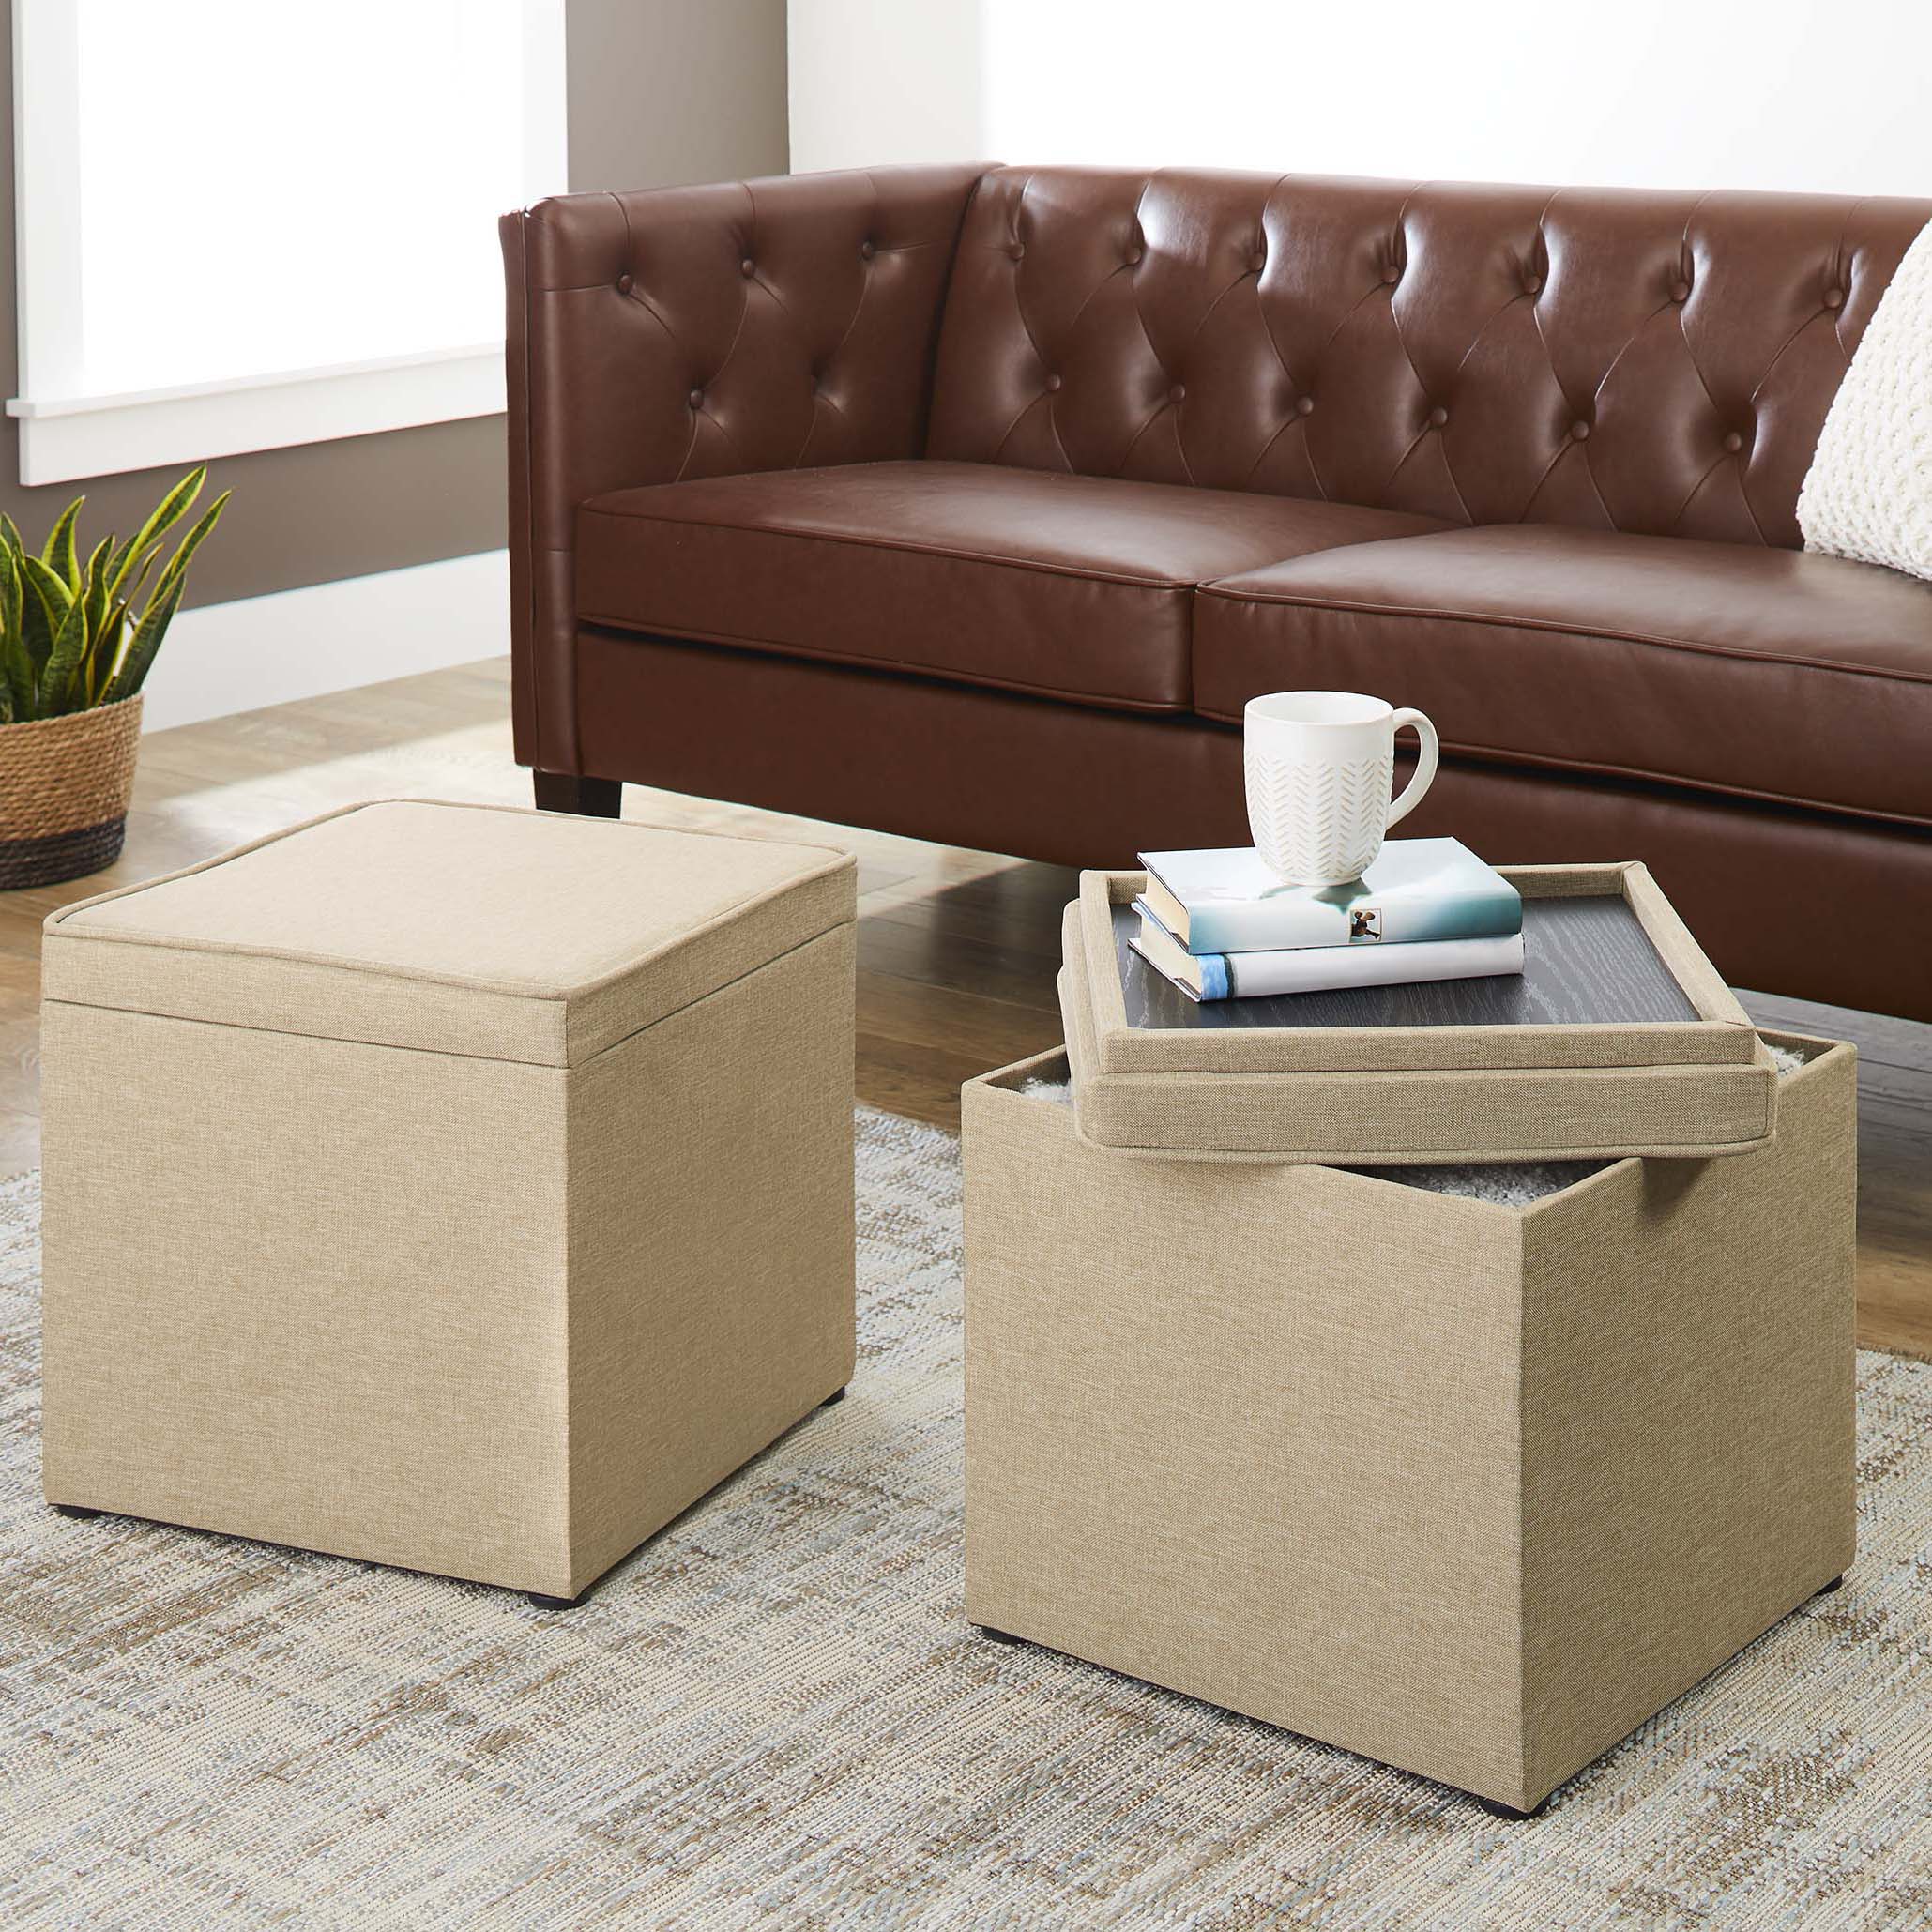 Better Homes & Gardens Addison Storage Ottoman with Tray, 16 Inch, Tan ...